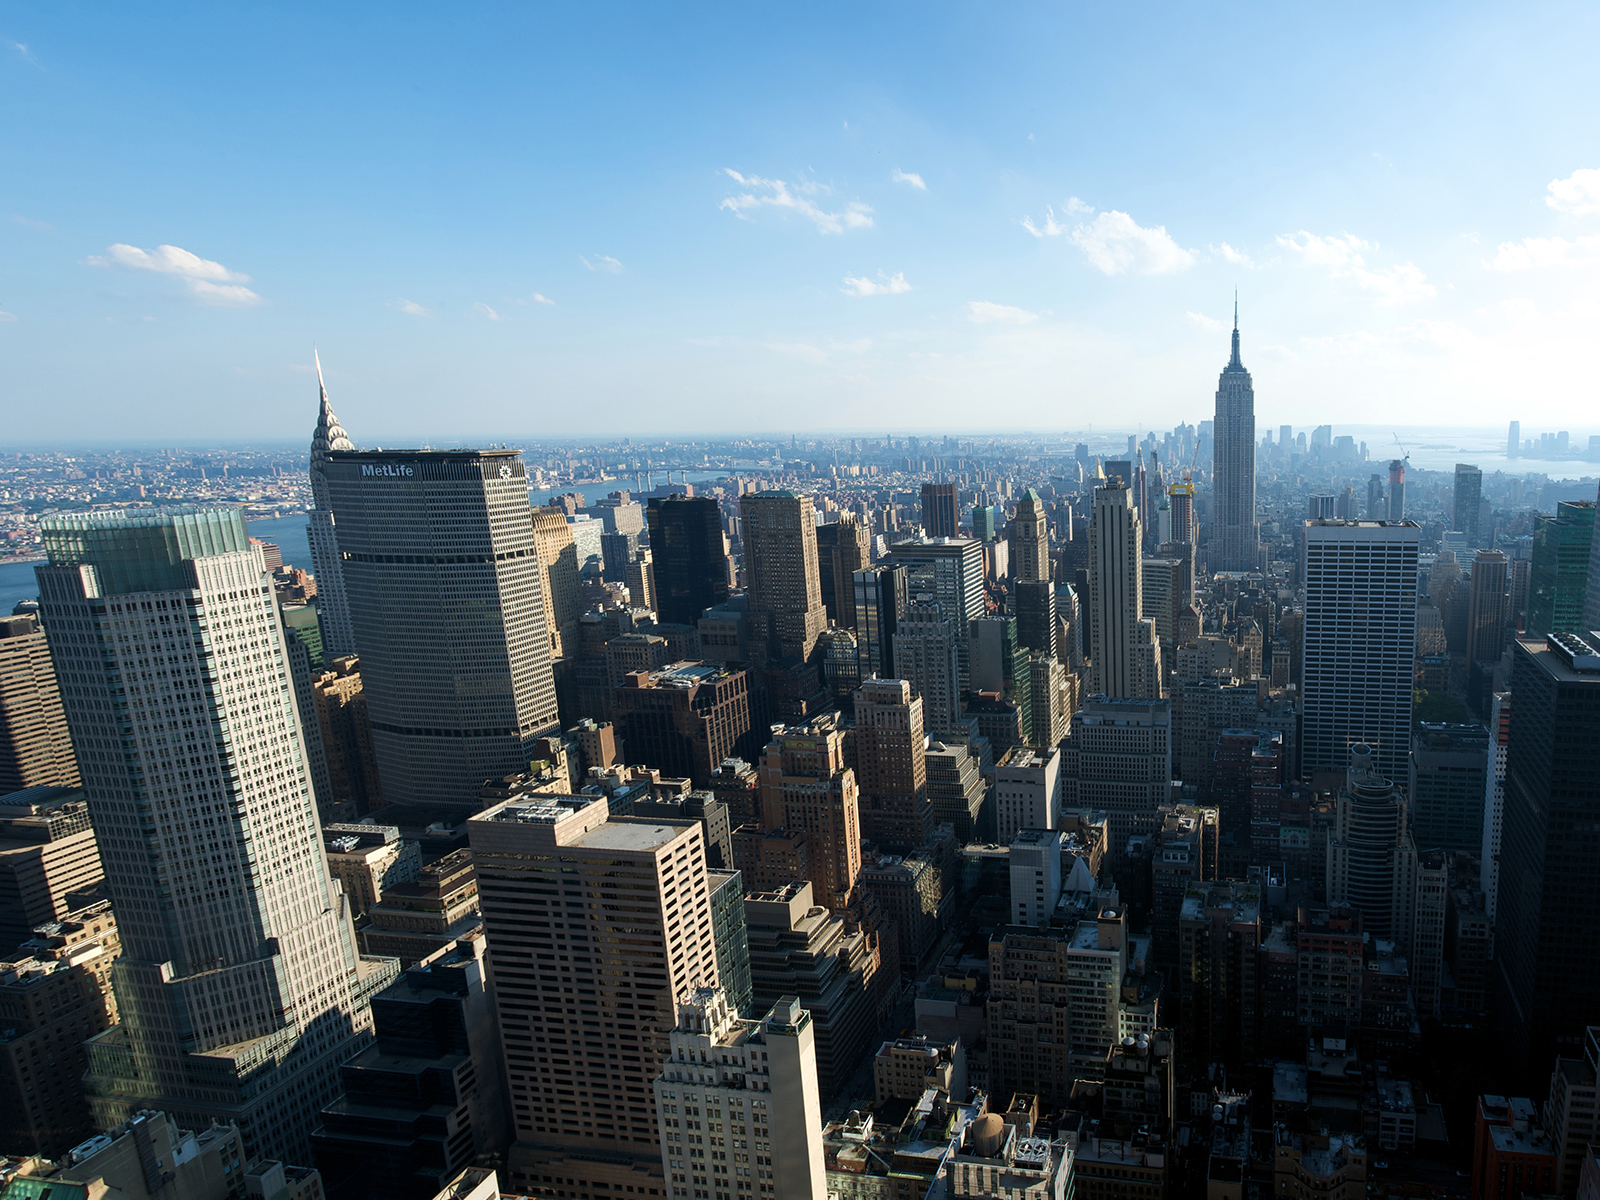 view from the top of the Rockefeller centre observation deck in New York, USA